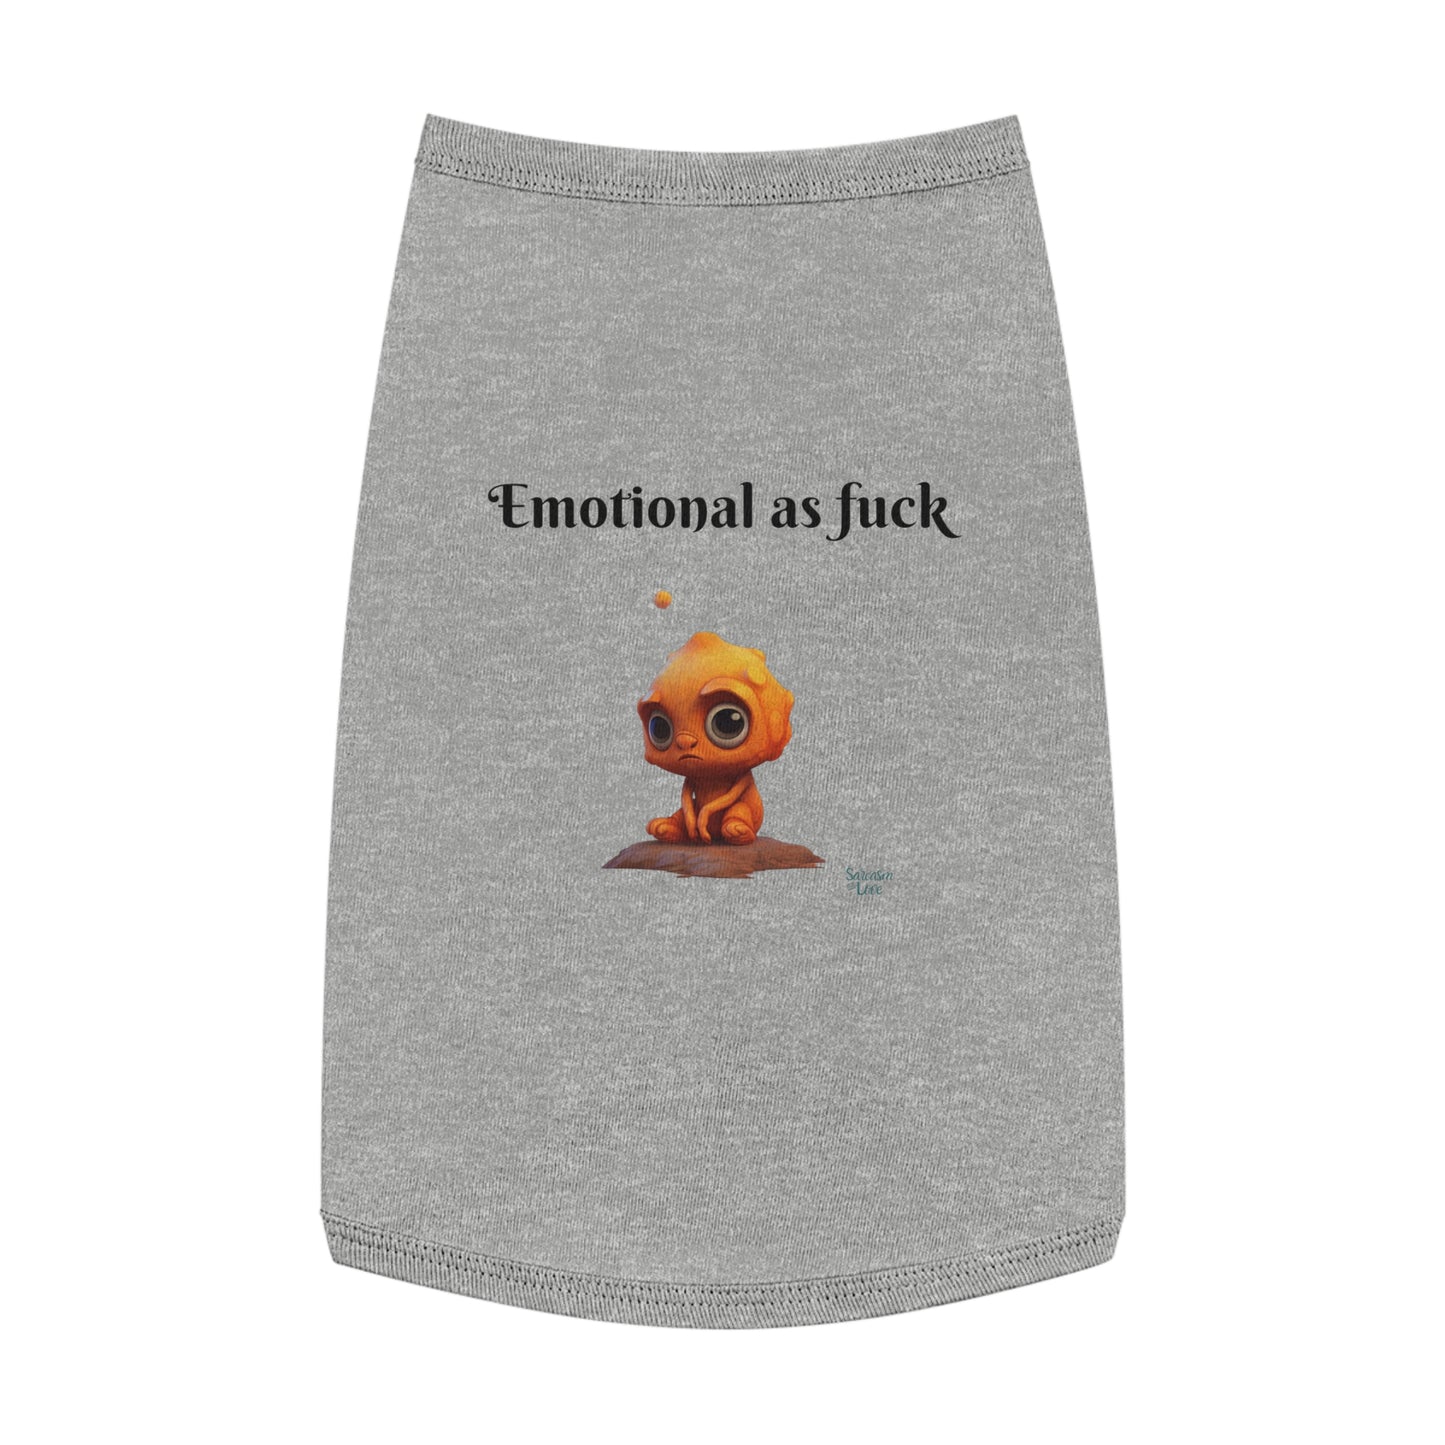 Emotional as Fuck Pet Tank Top - Express Your Pet's Quirky Emotions